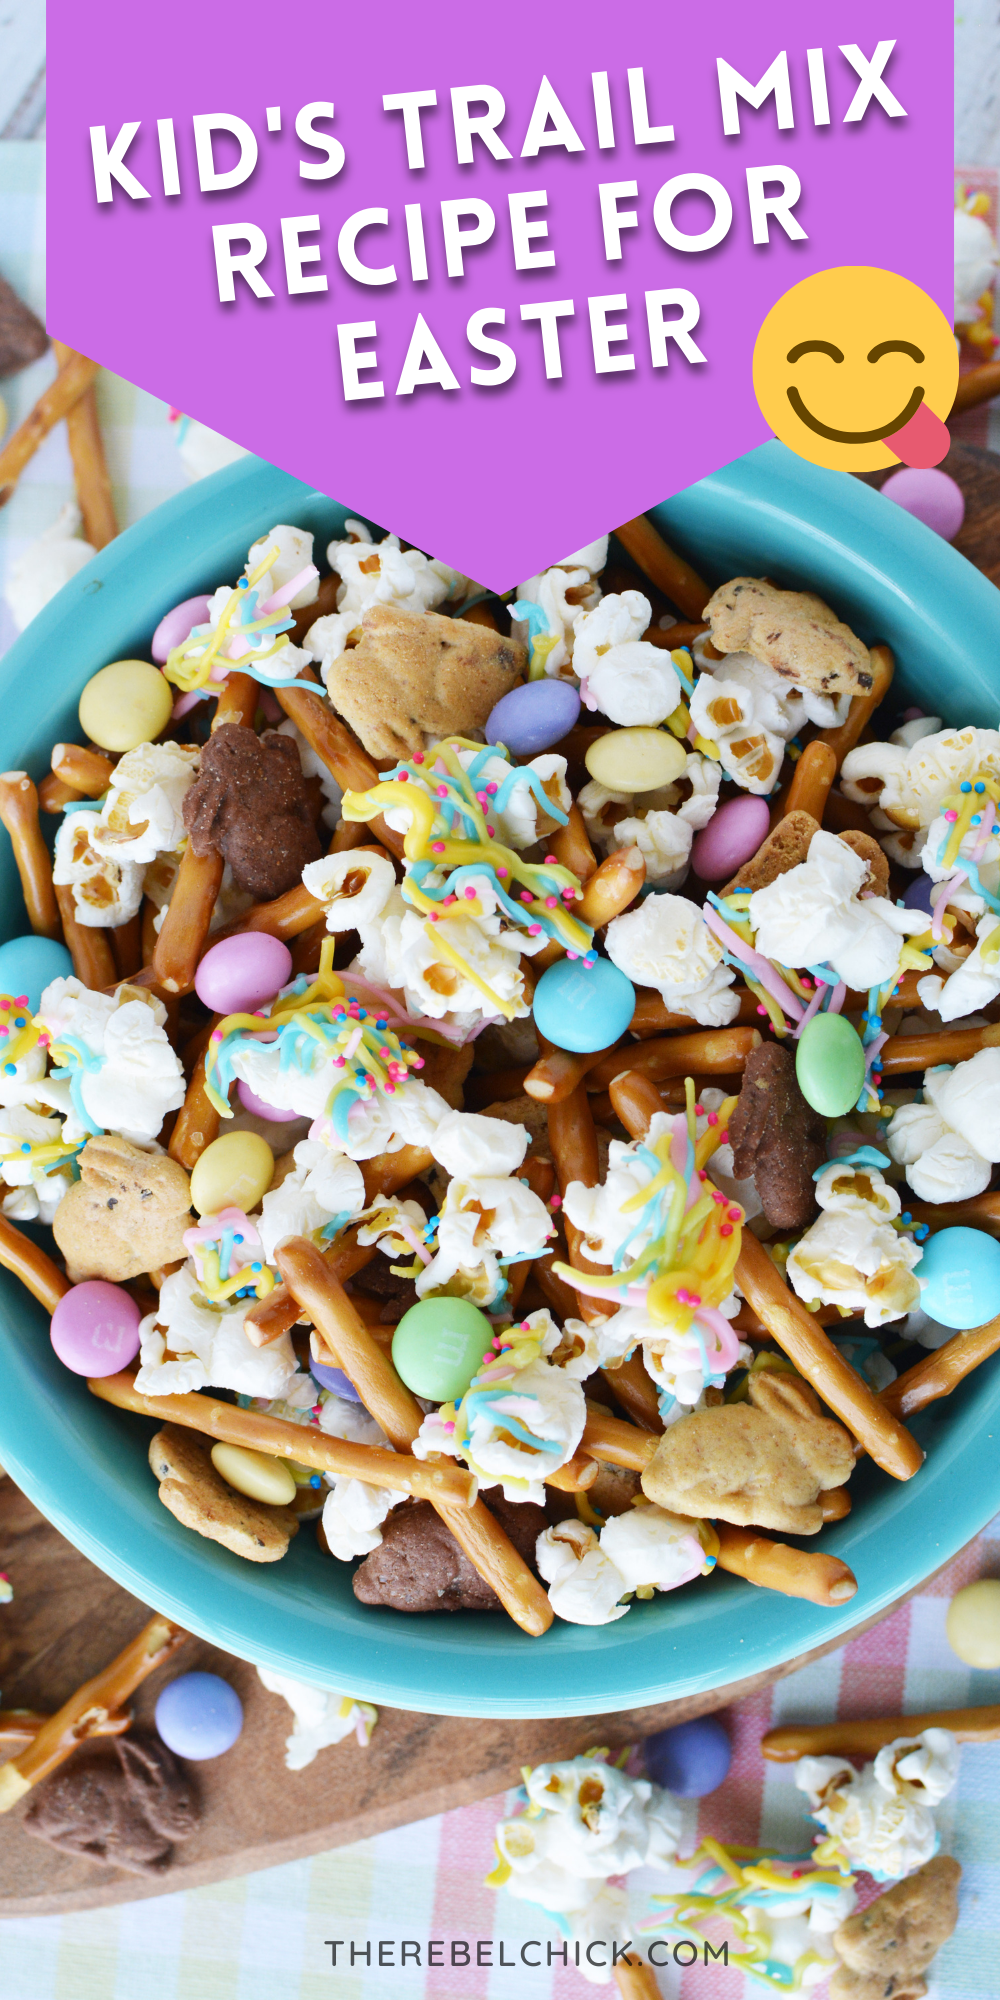 This Easter Trail Mix is a fun and easy to make snack for the kids!